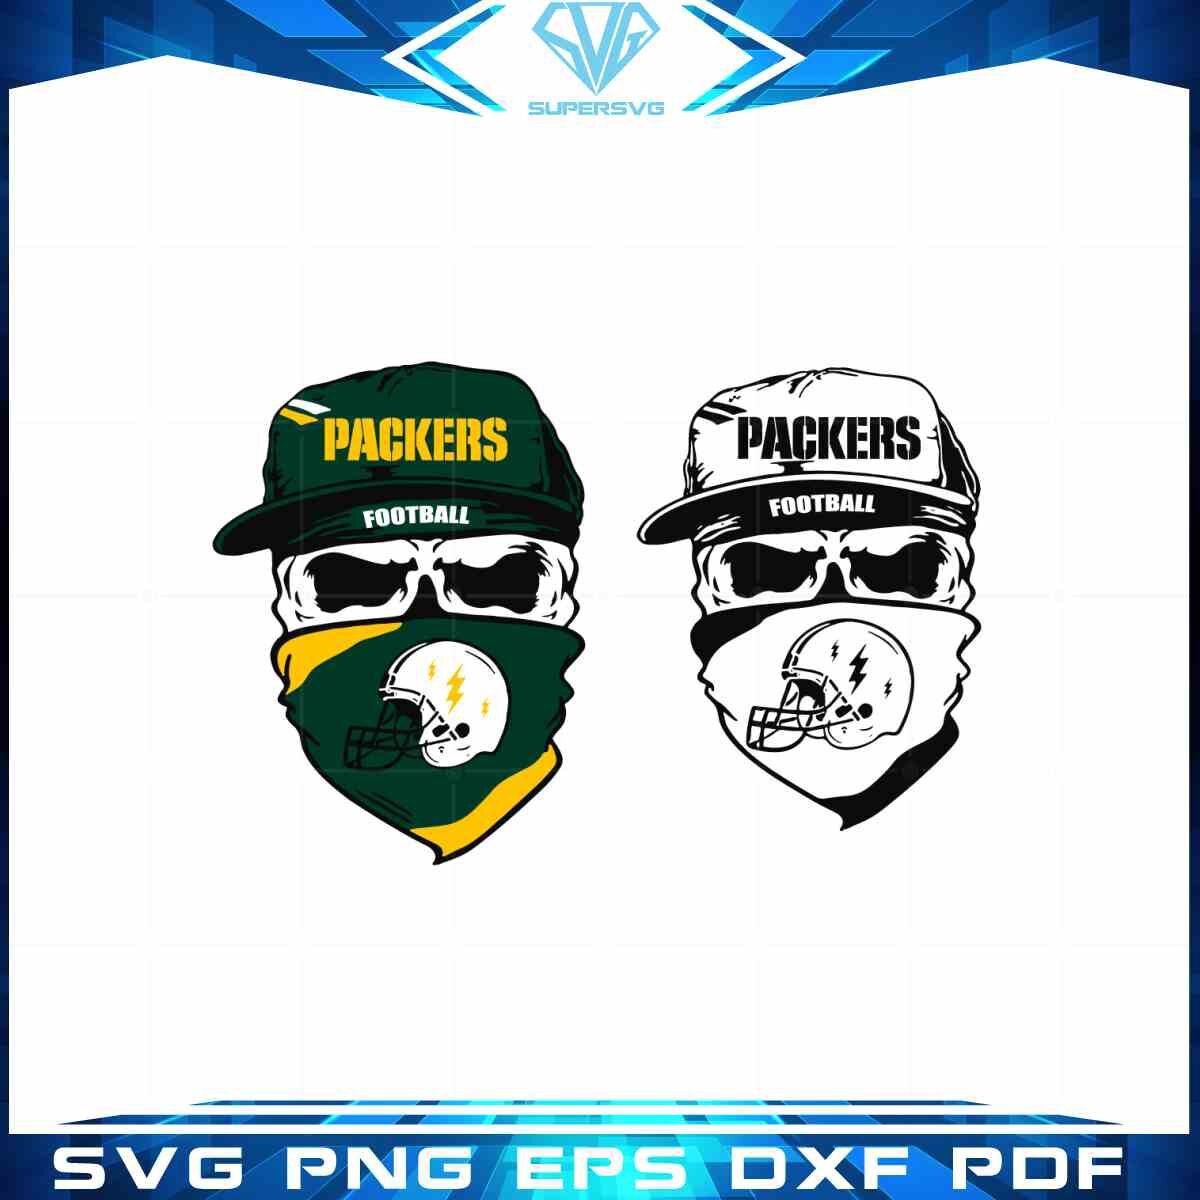 nfl-green-bay-packers-football-team-best-ideas-svg-graphic-design-file